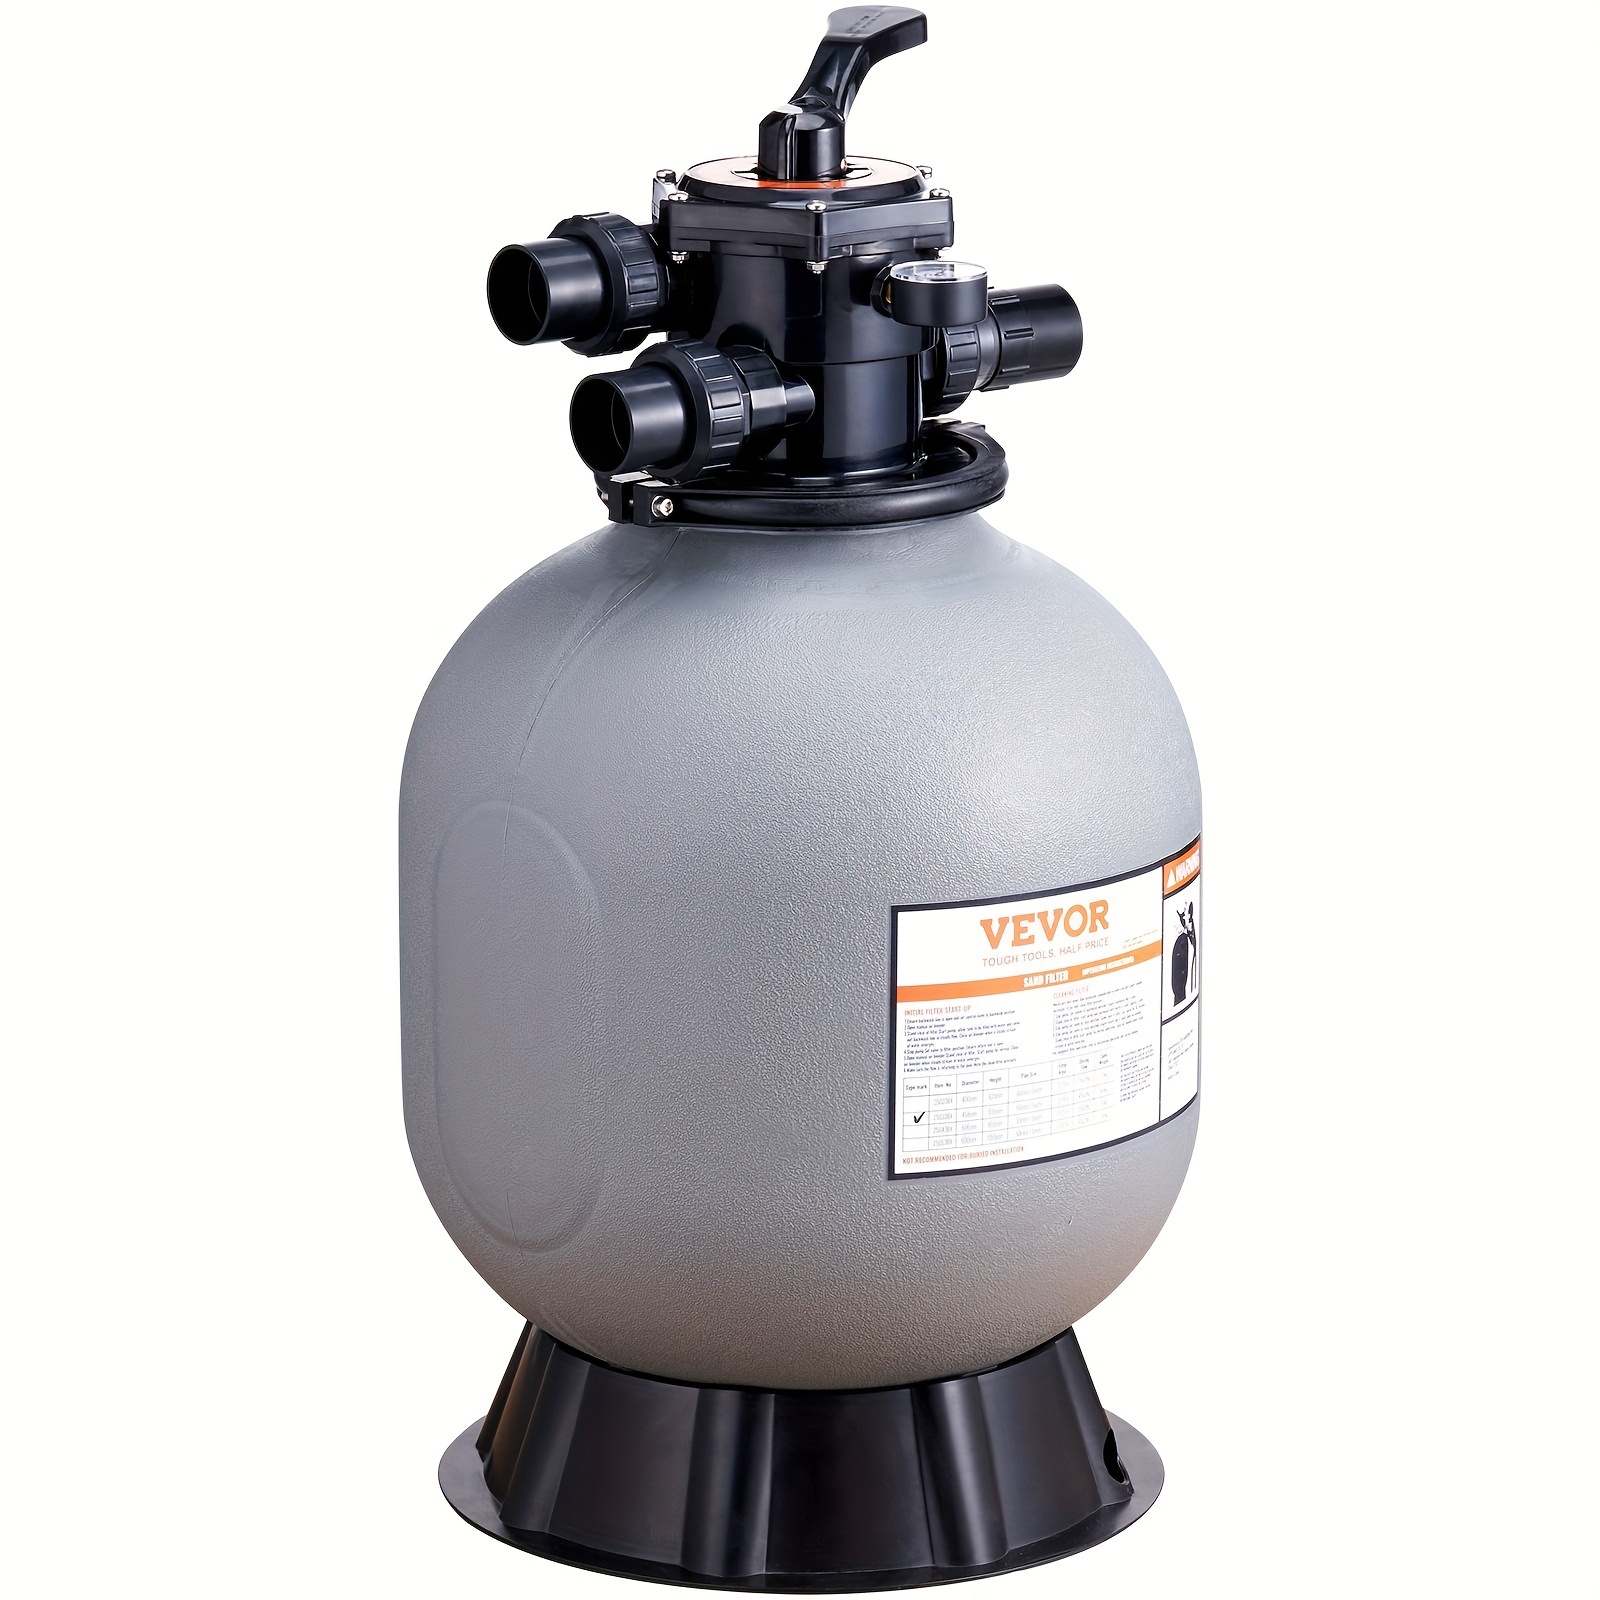 

Sand Filter, 22-inch, Up To 55 Gpm Flow Rate, Above Inground Swimming Pool Sand Filter System With 7-way Multi-port Valve, Filter, Backwash, Rinse, Recirculate, Waste, Winter, Closed Functions